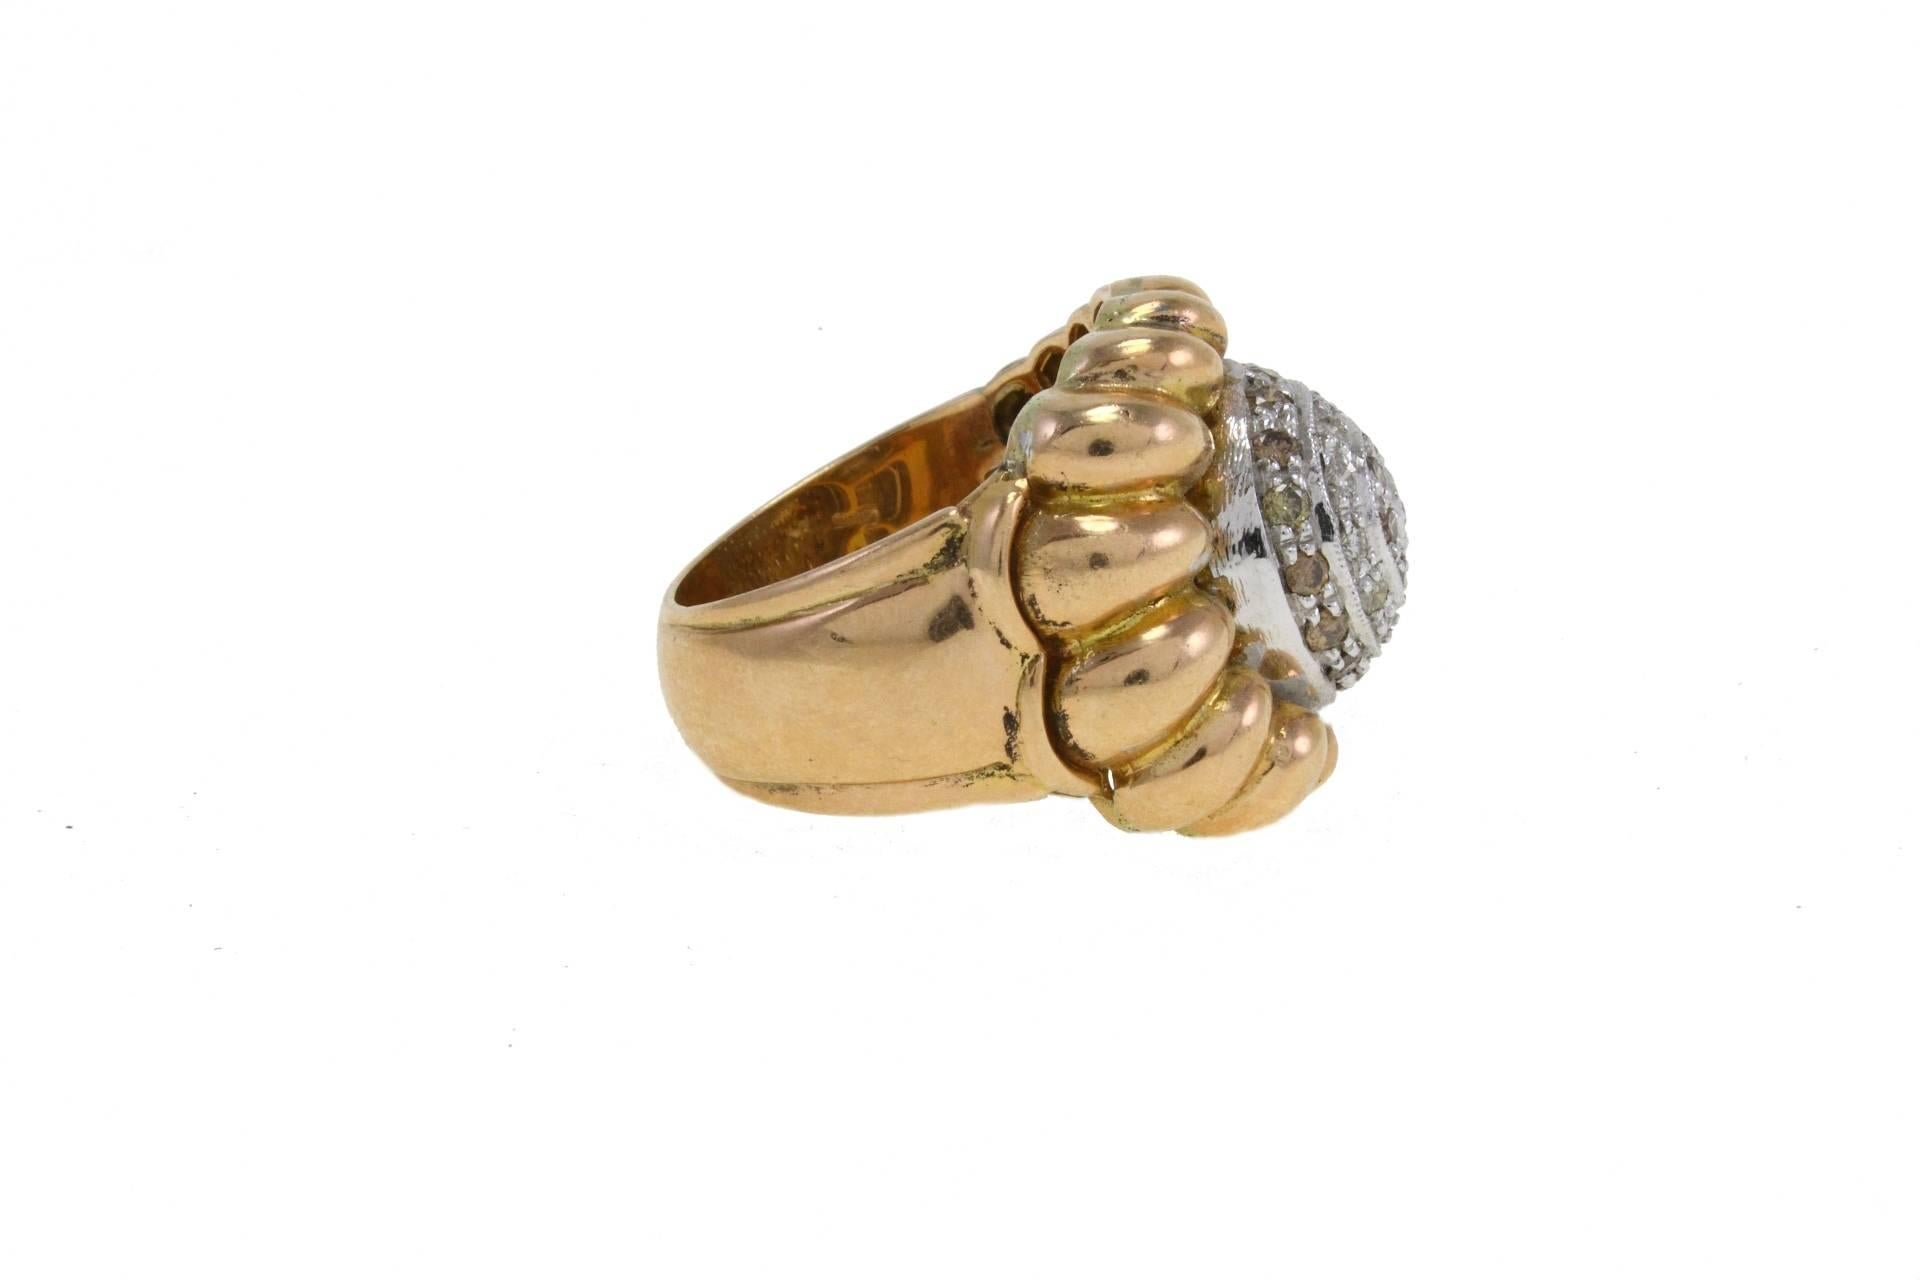 Cornucopia ring in 14kt rose and white gold with brown and white diamonds stripes.
diamonds 1.71kt
tot weight 18gr
US Size
Width 0.98 inches
Length 0.74 inches
Higth 0.35 inches
Diameter 0.70 inches          
ita size 21/ french size 61/usa 9.5     